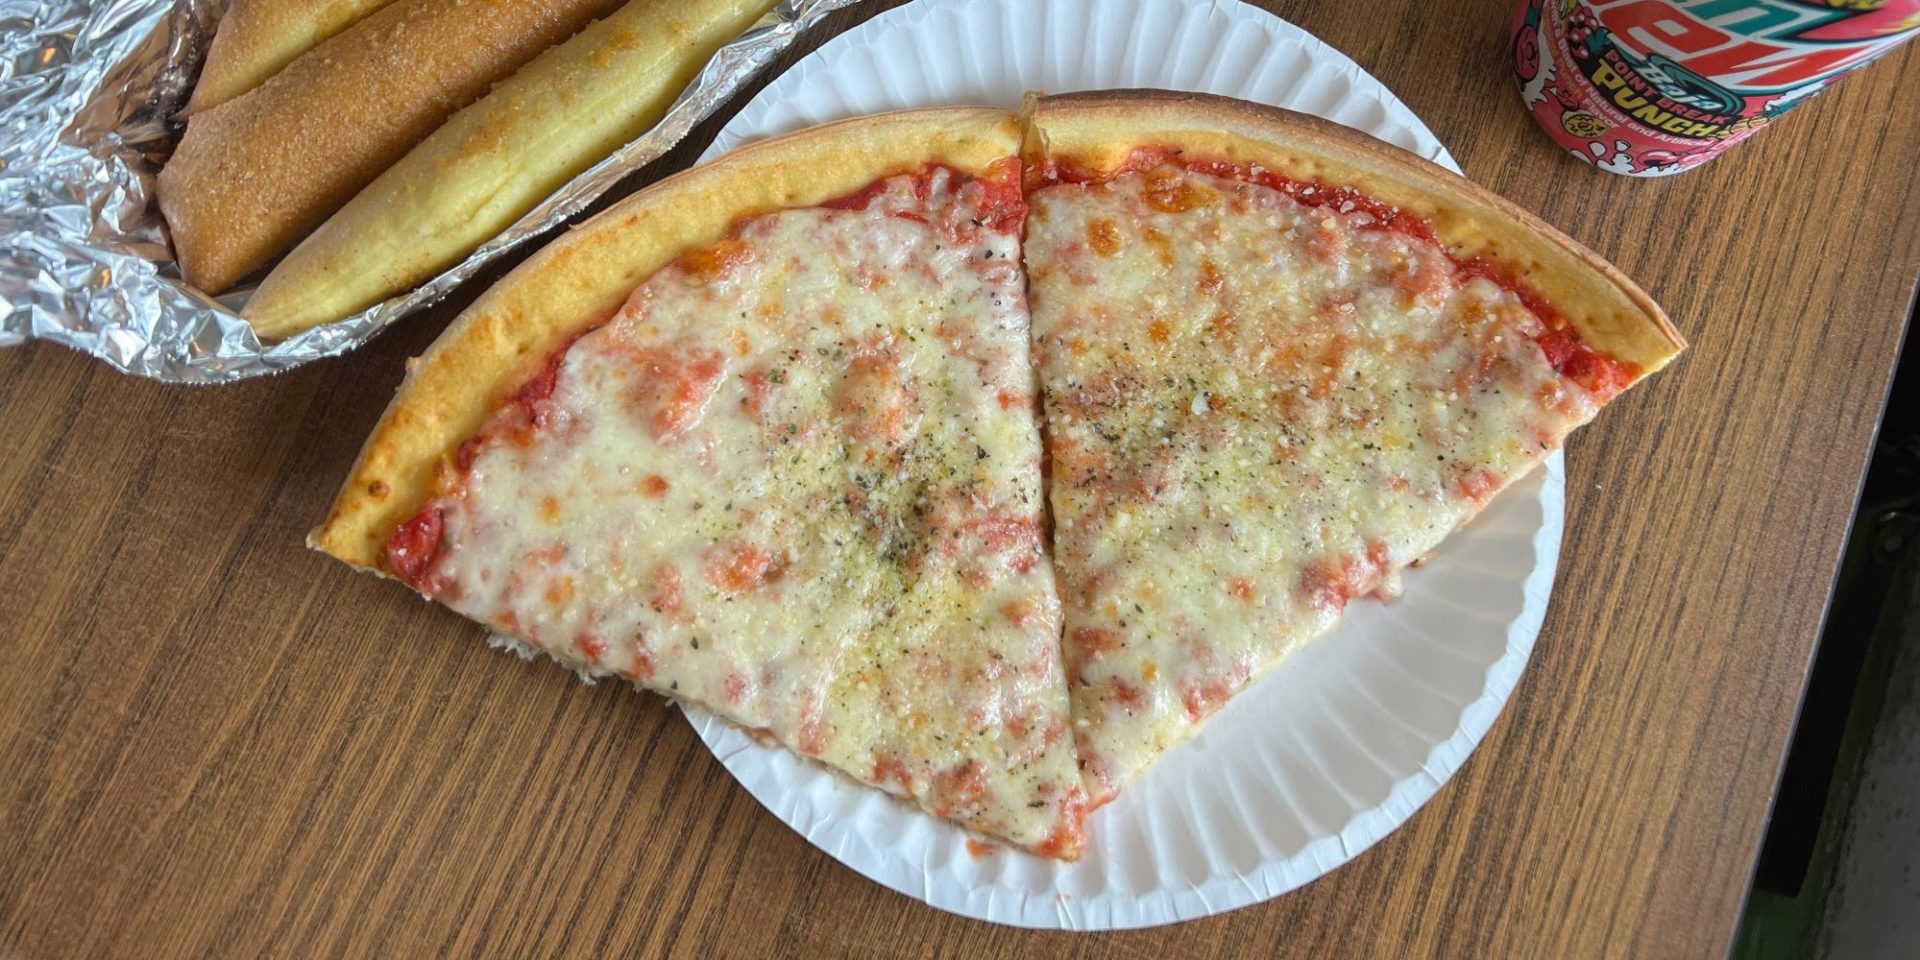 Two slices of thin-crust pizza on a white paper plate beside three breadsticks in tin-foil with a can of Mountain Dew Baja fruit punch.